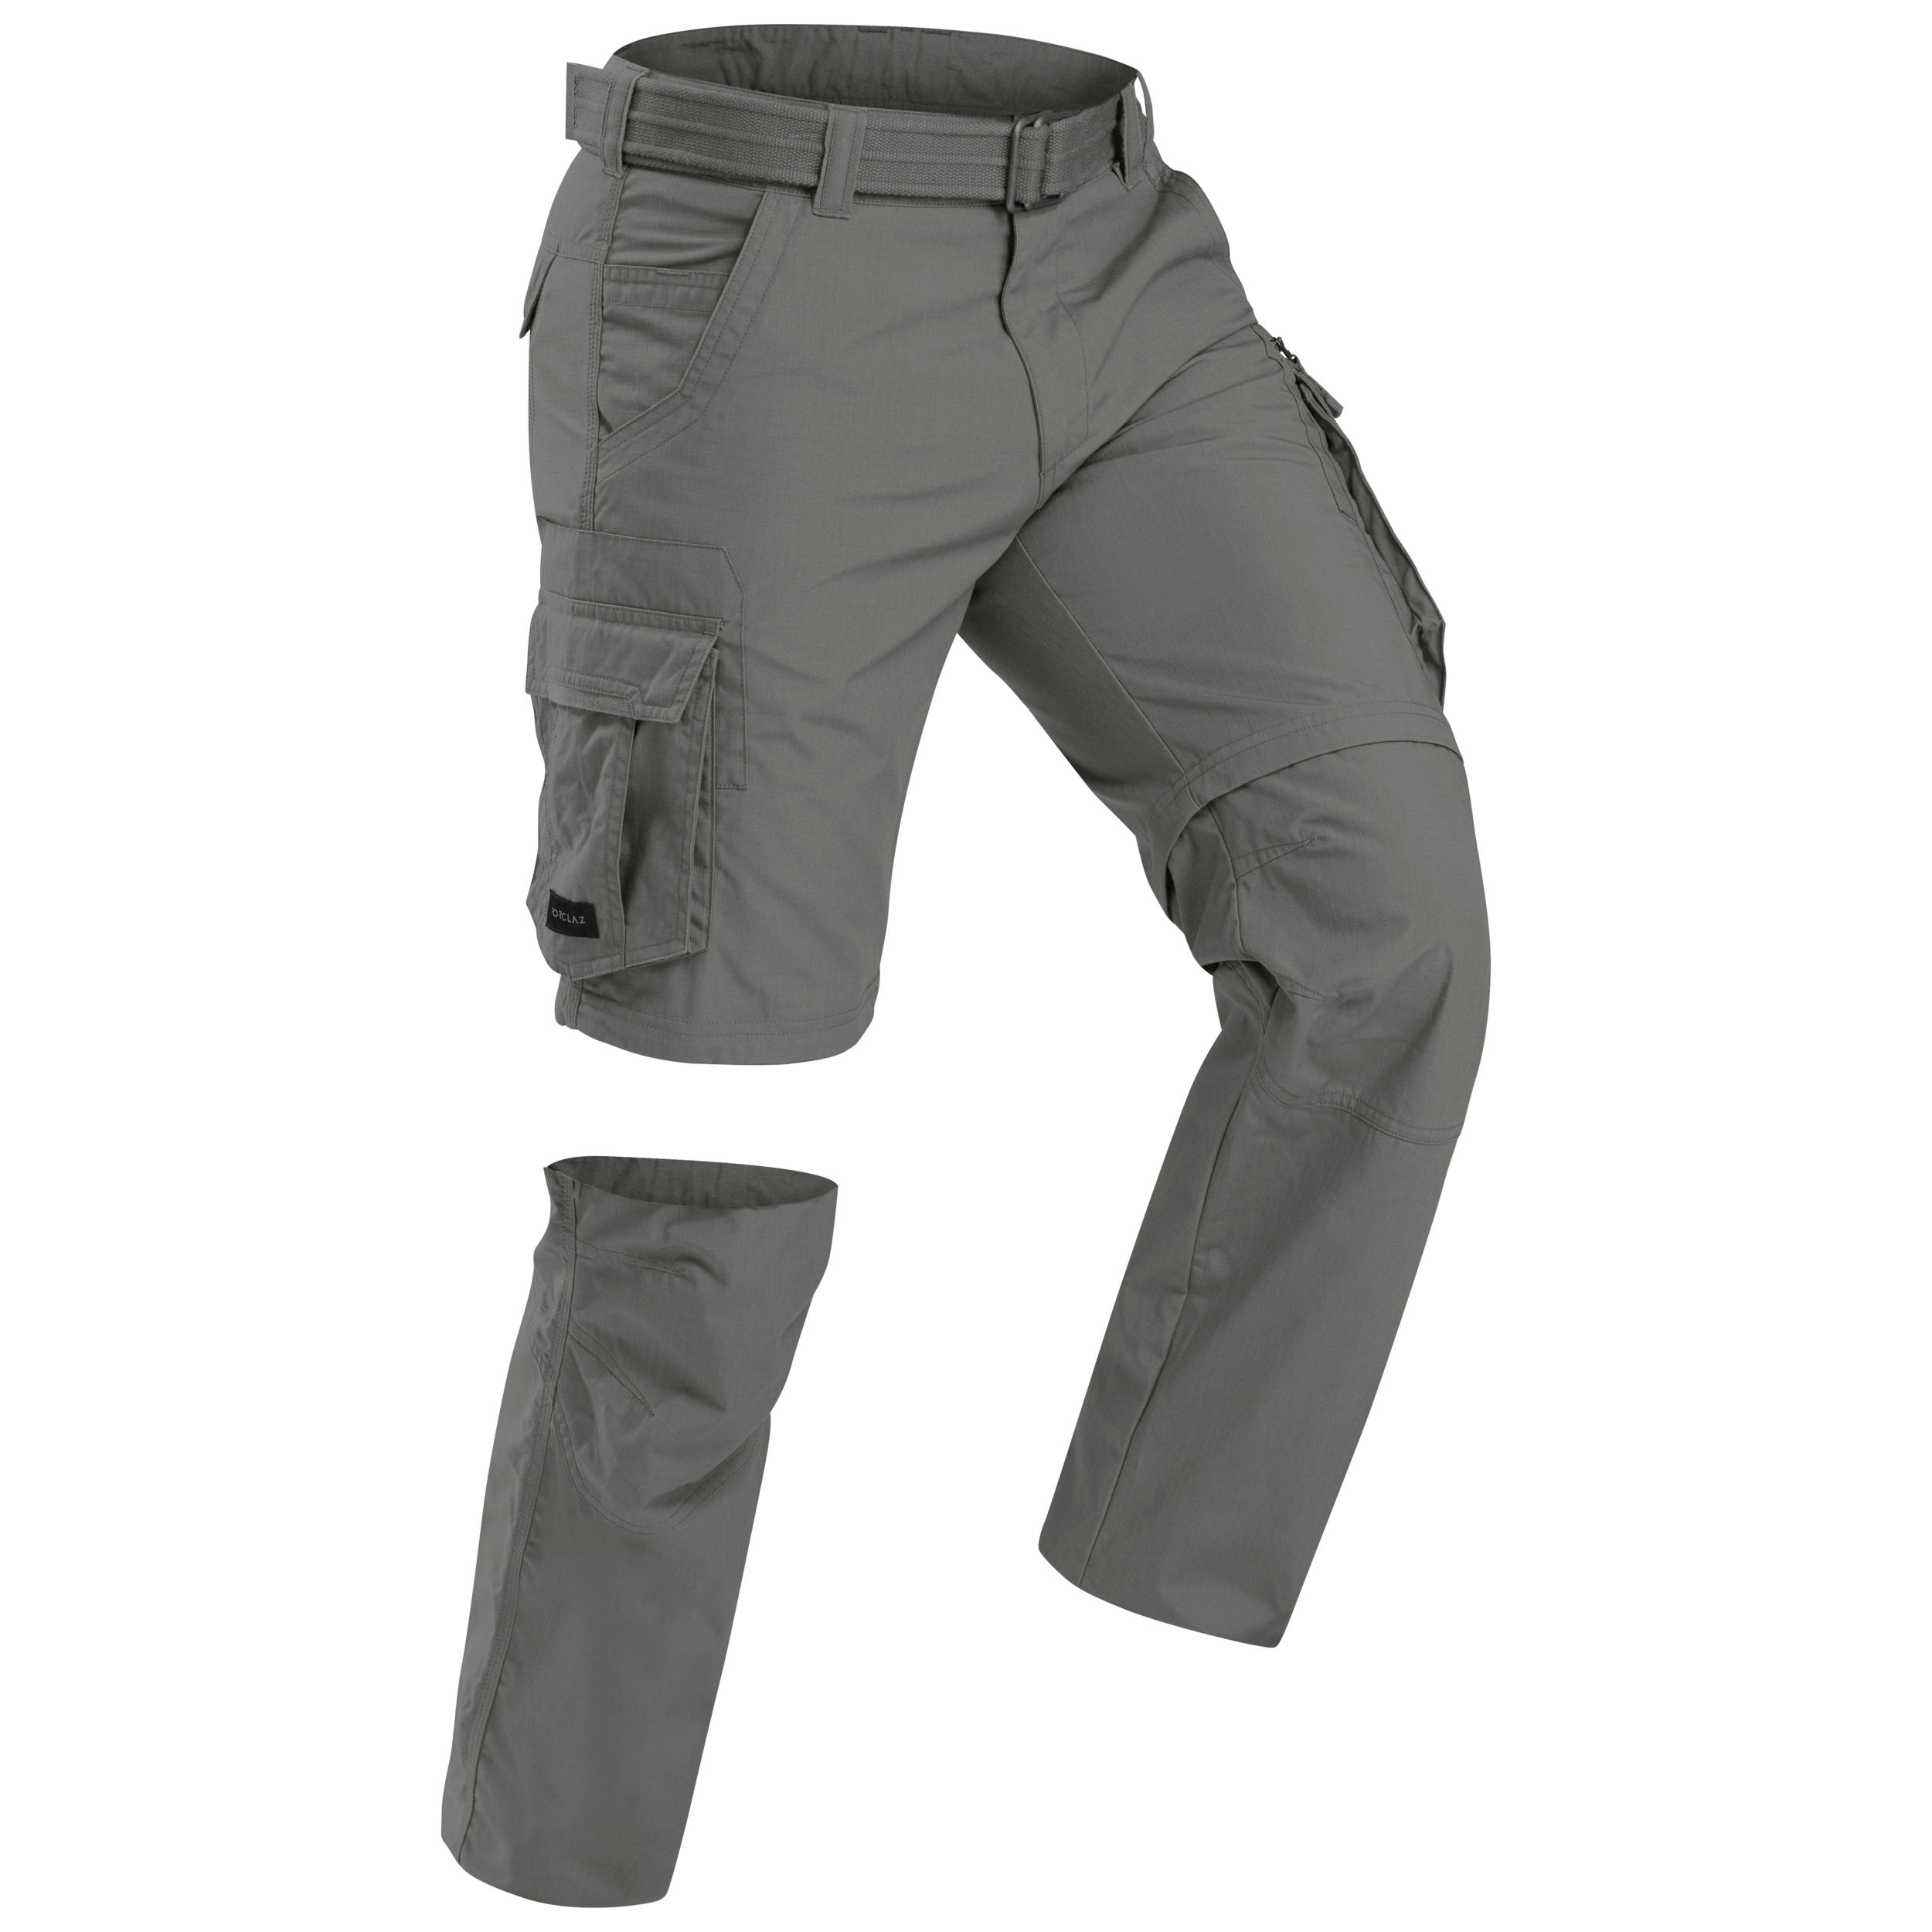 Buy Pants for Outdoor Sports at decathlon.in | 5 Year Warranty